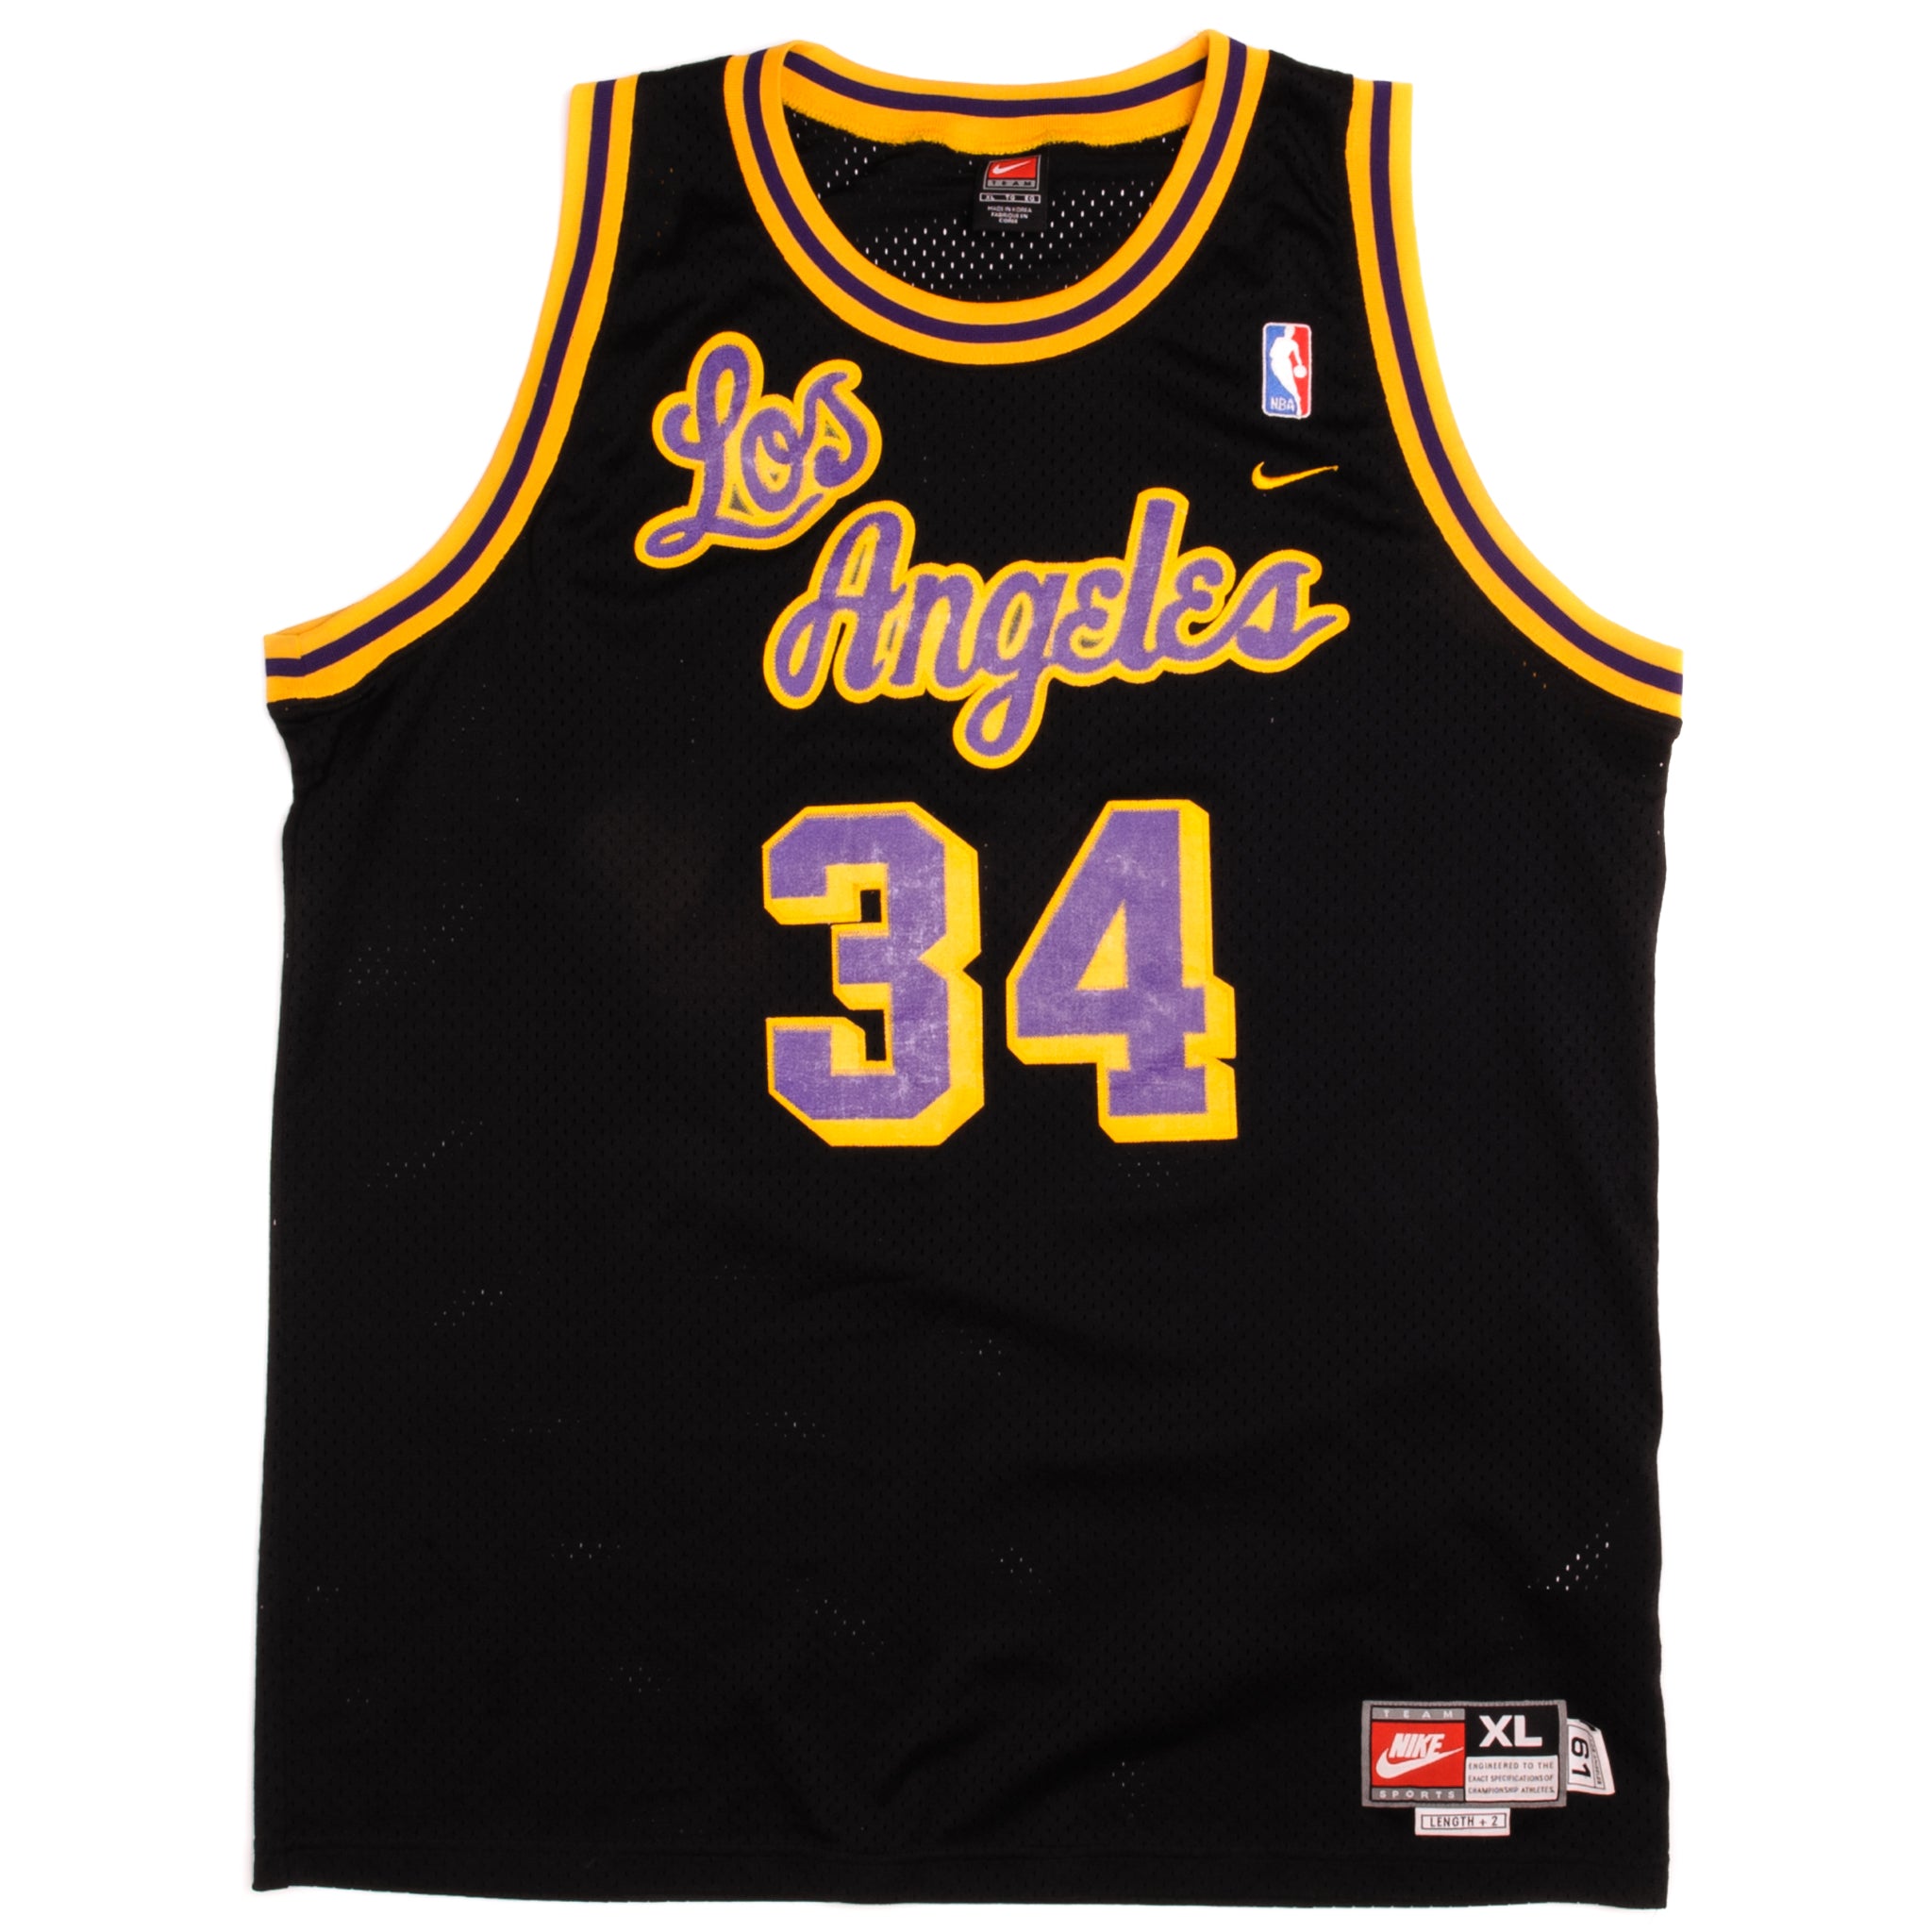 color shaquille o neal jersey